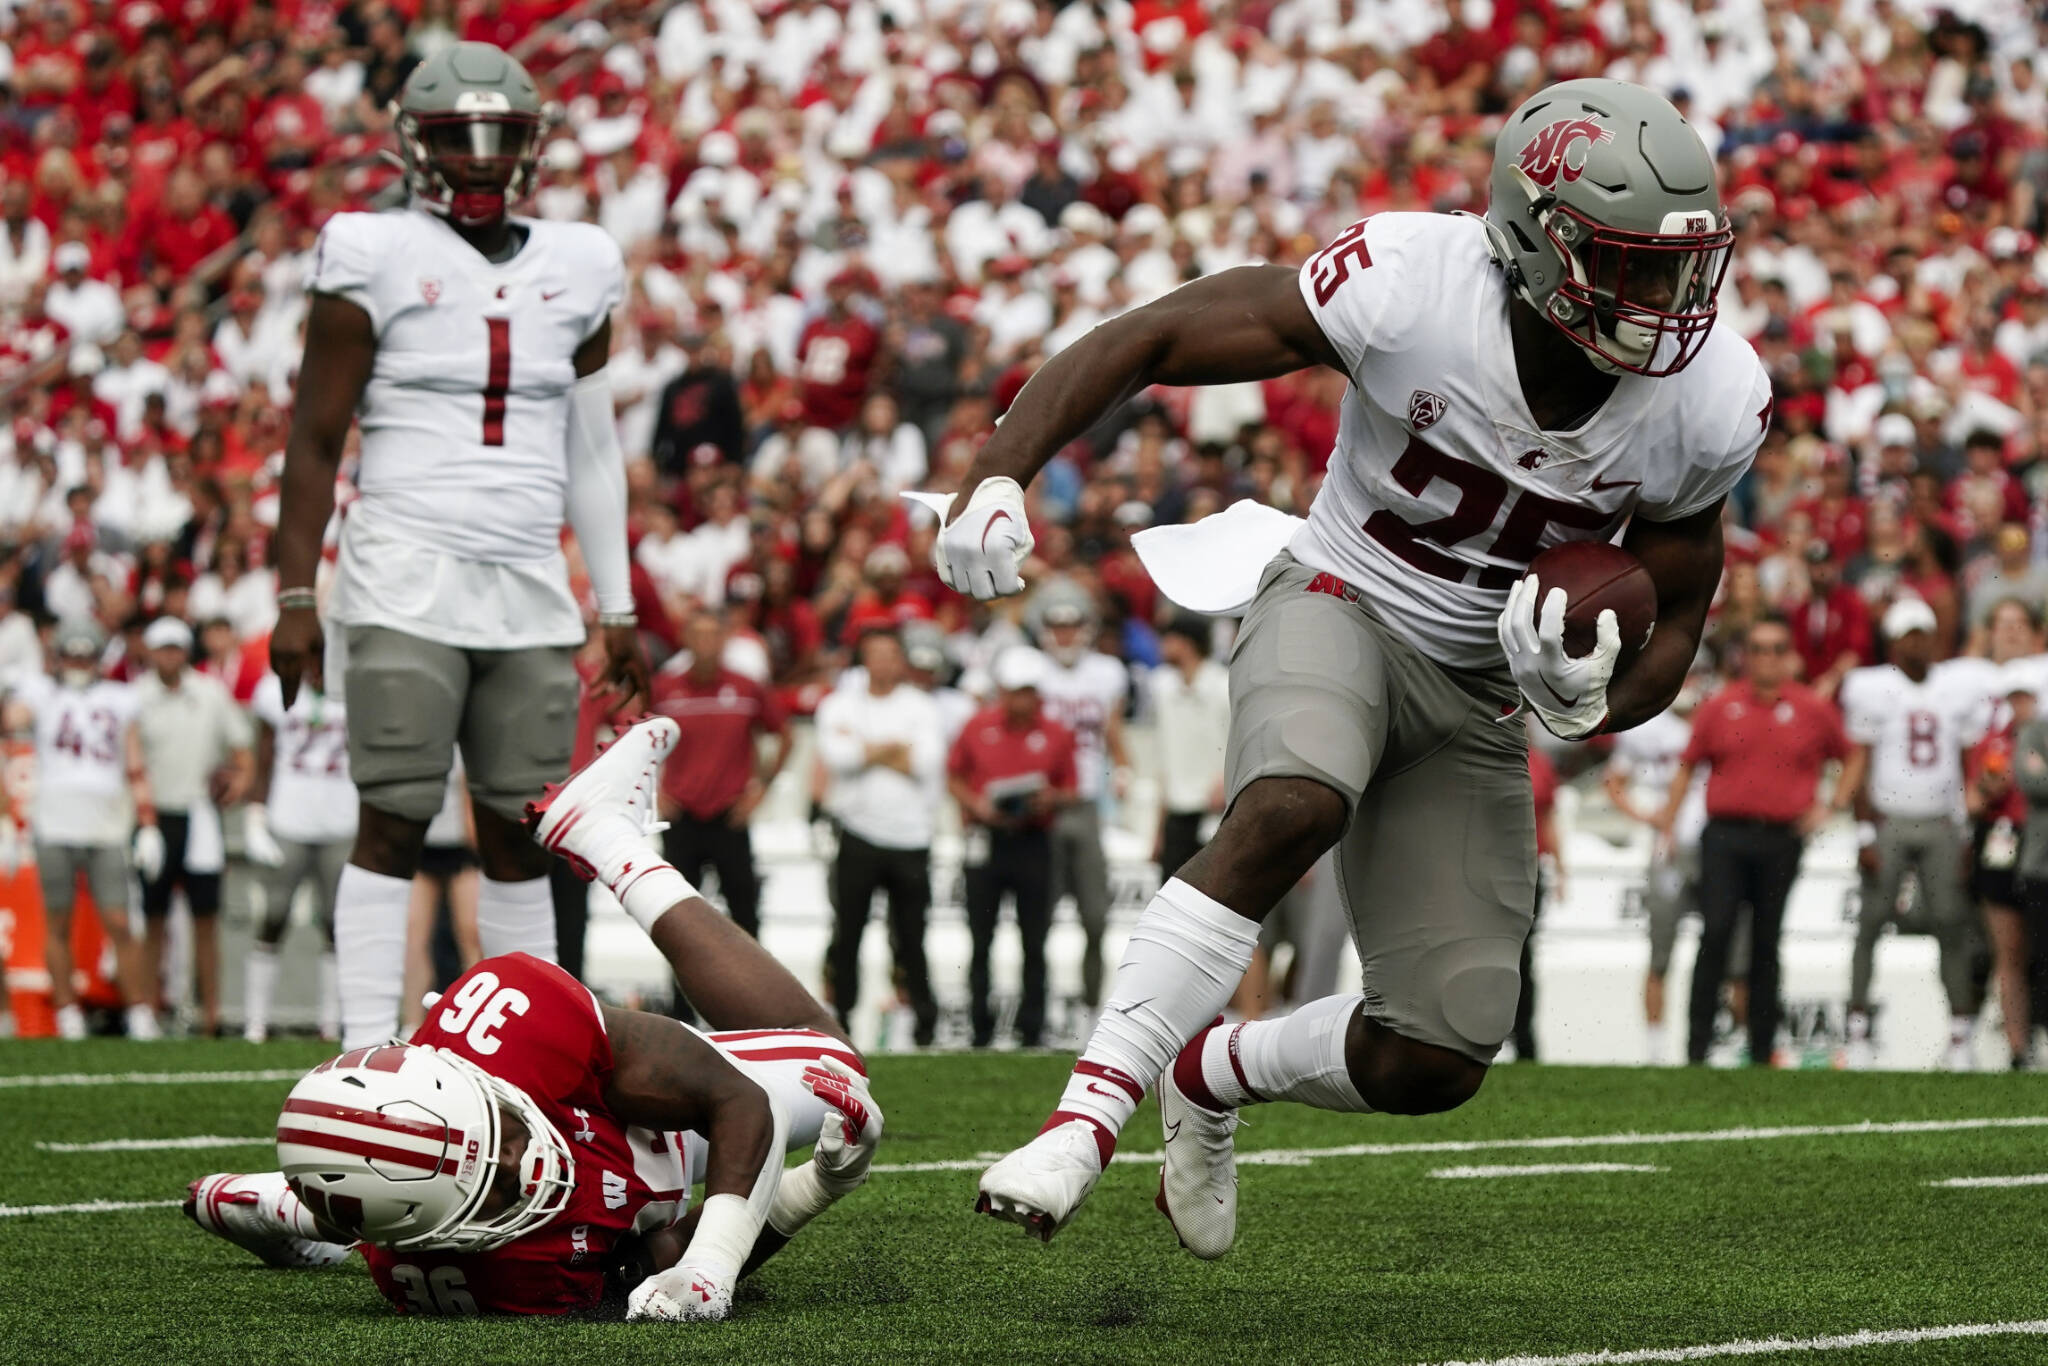 Washington State’s Nakia Watson (25) runs past Wisconsin’s Jake Chaney (36) during the first half of a game Saturday in Madison, Wis. (AP Photo/Morry Gash)